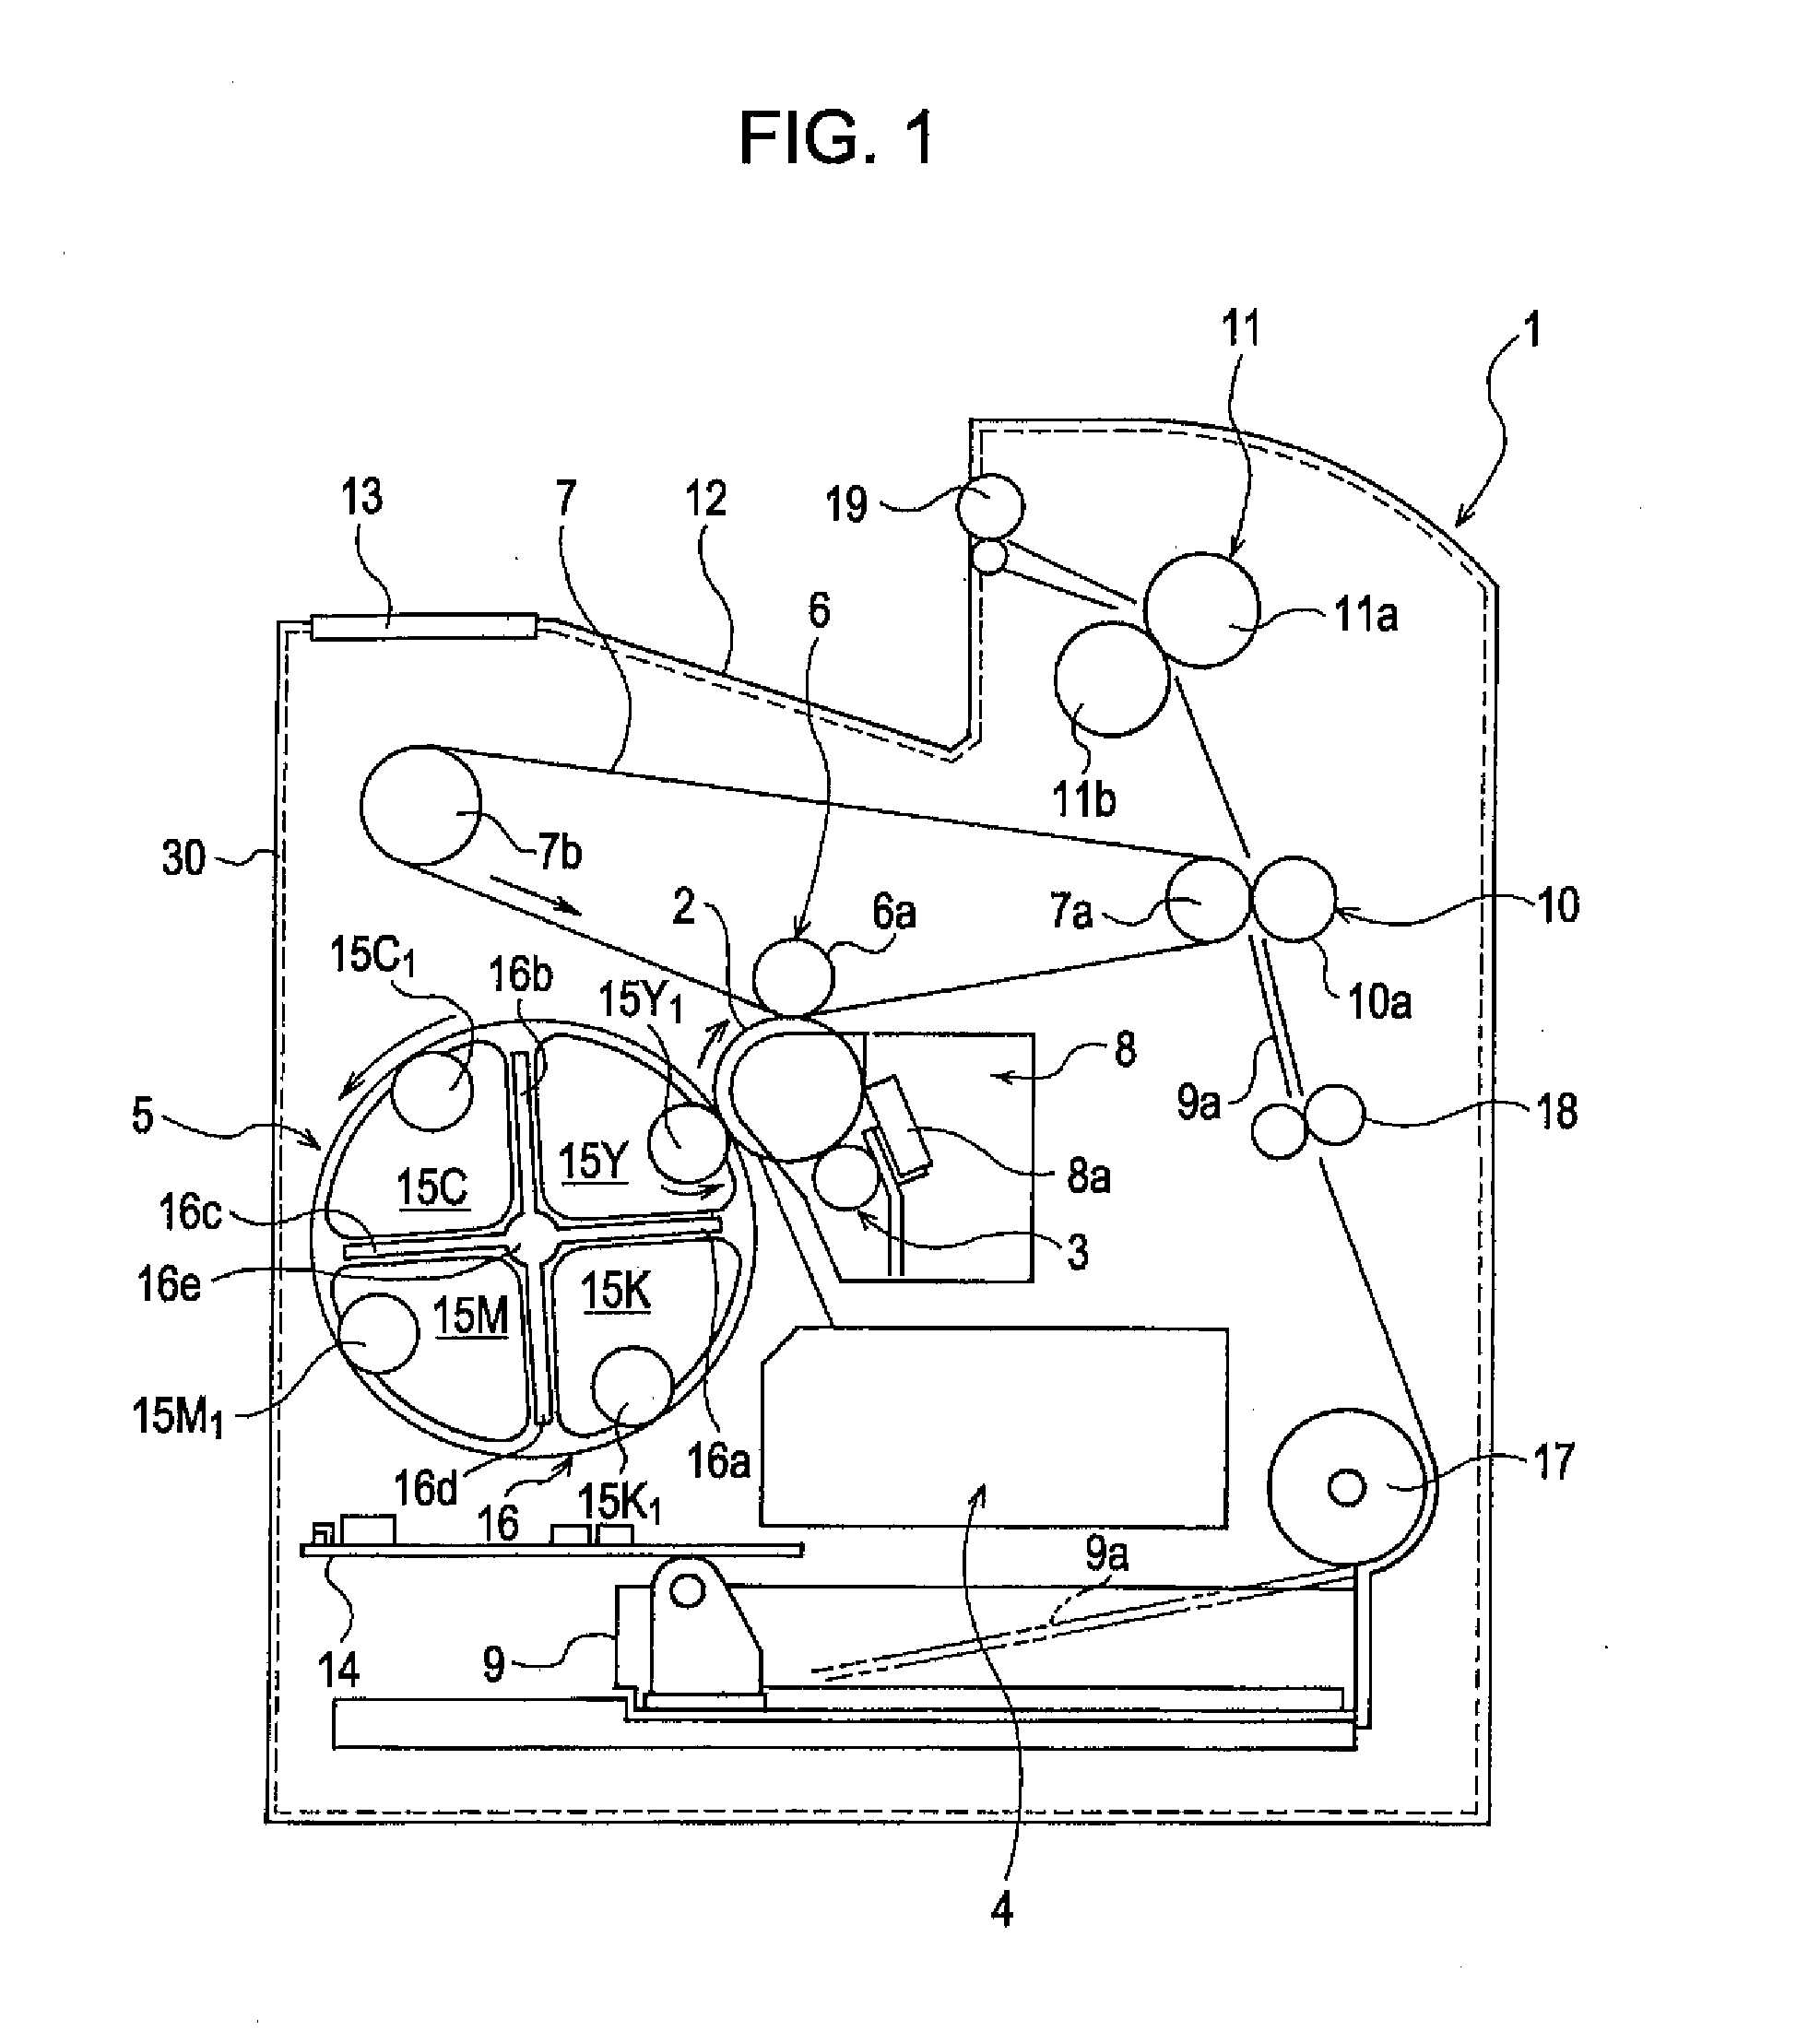 Rotary Developer And Image Formation Apparatus Having Rotary Developer